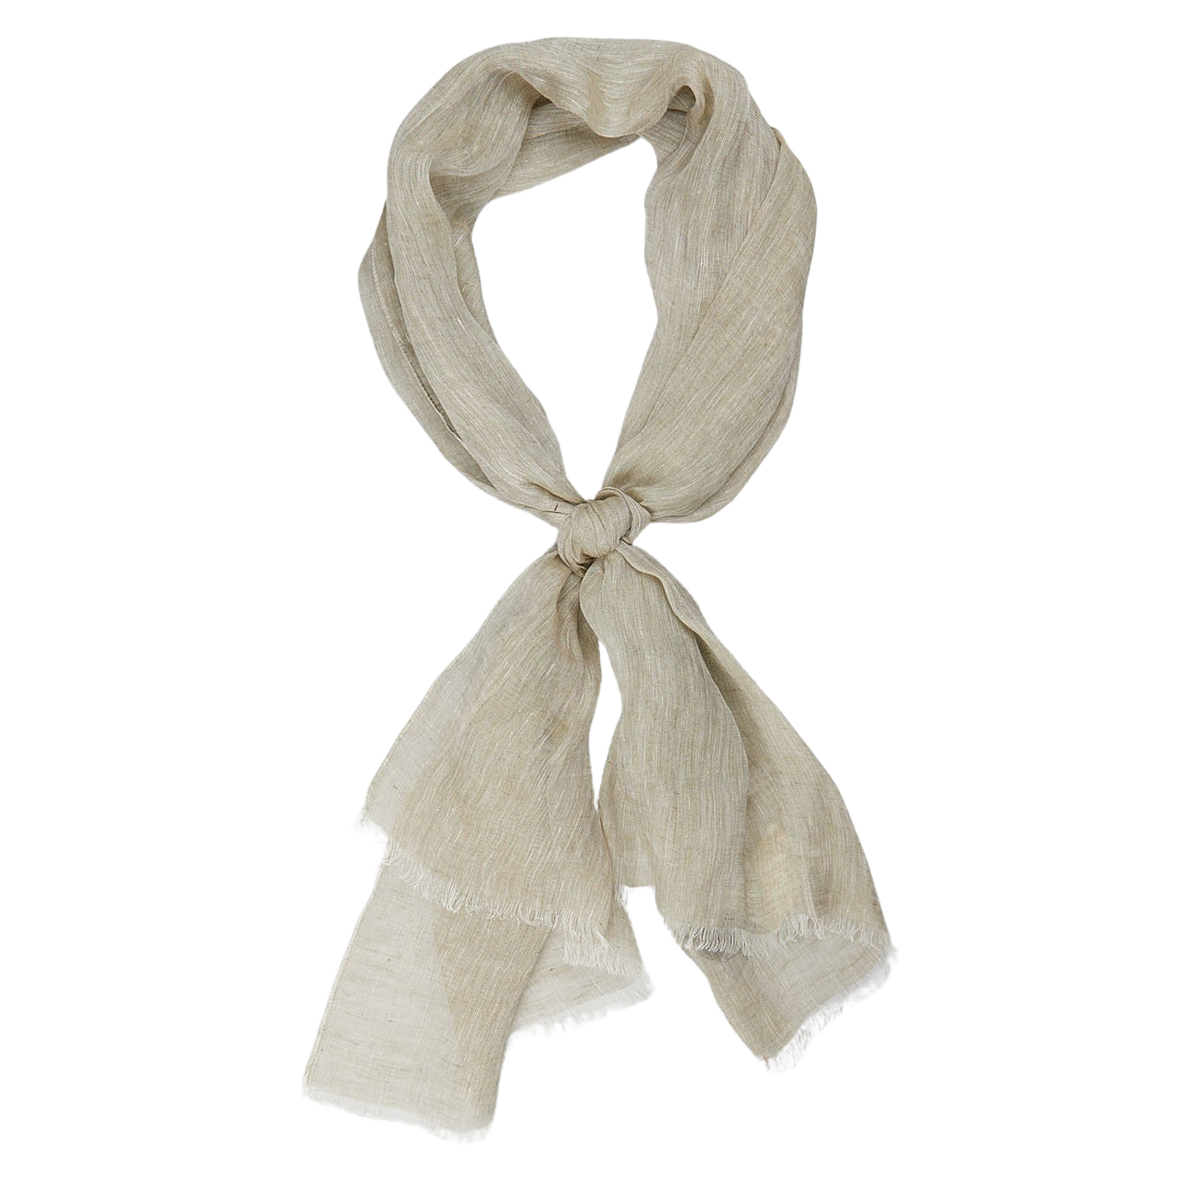 A Olive Melange Linen Gauze Scarf by Amanda Christensen, light beige scarf tied in a knot against a white background.